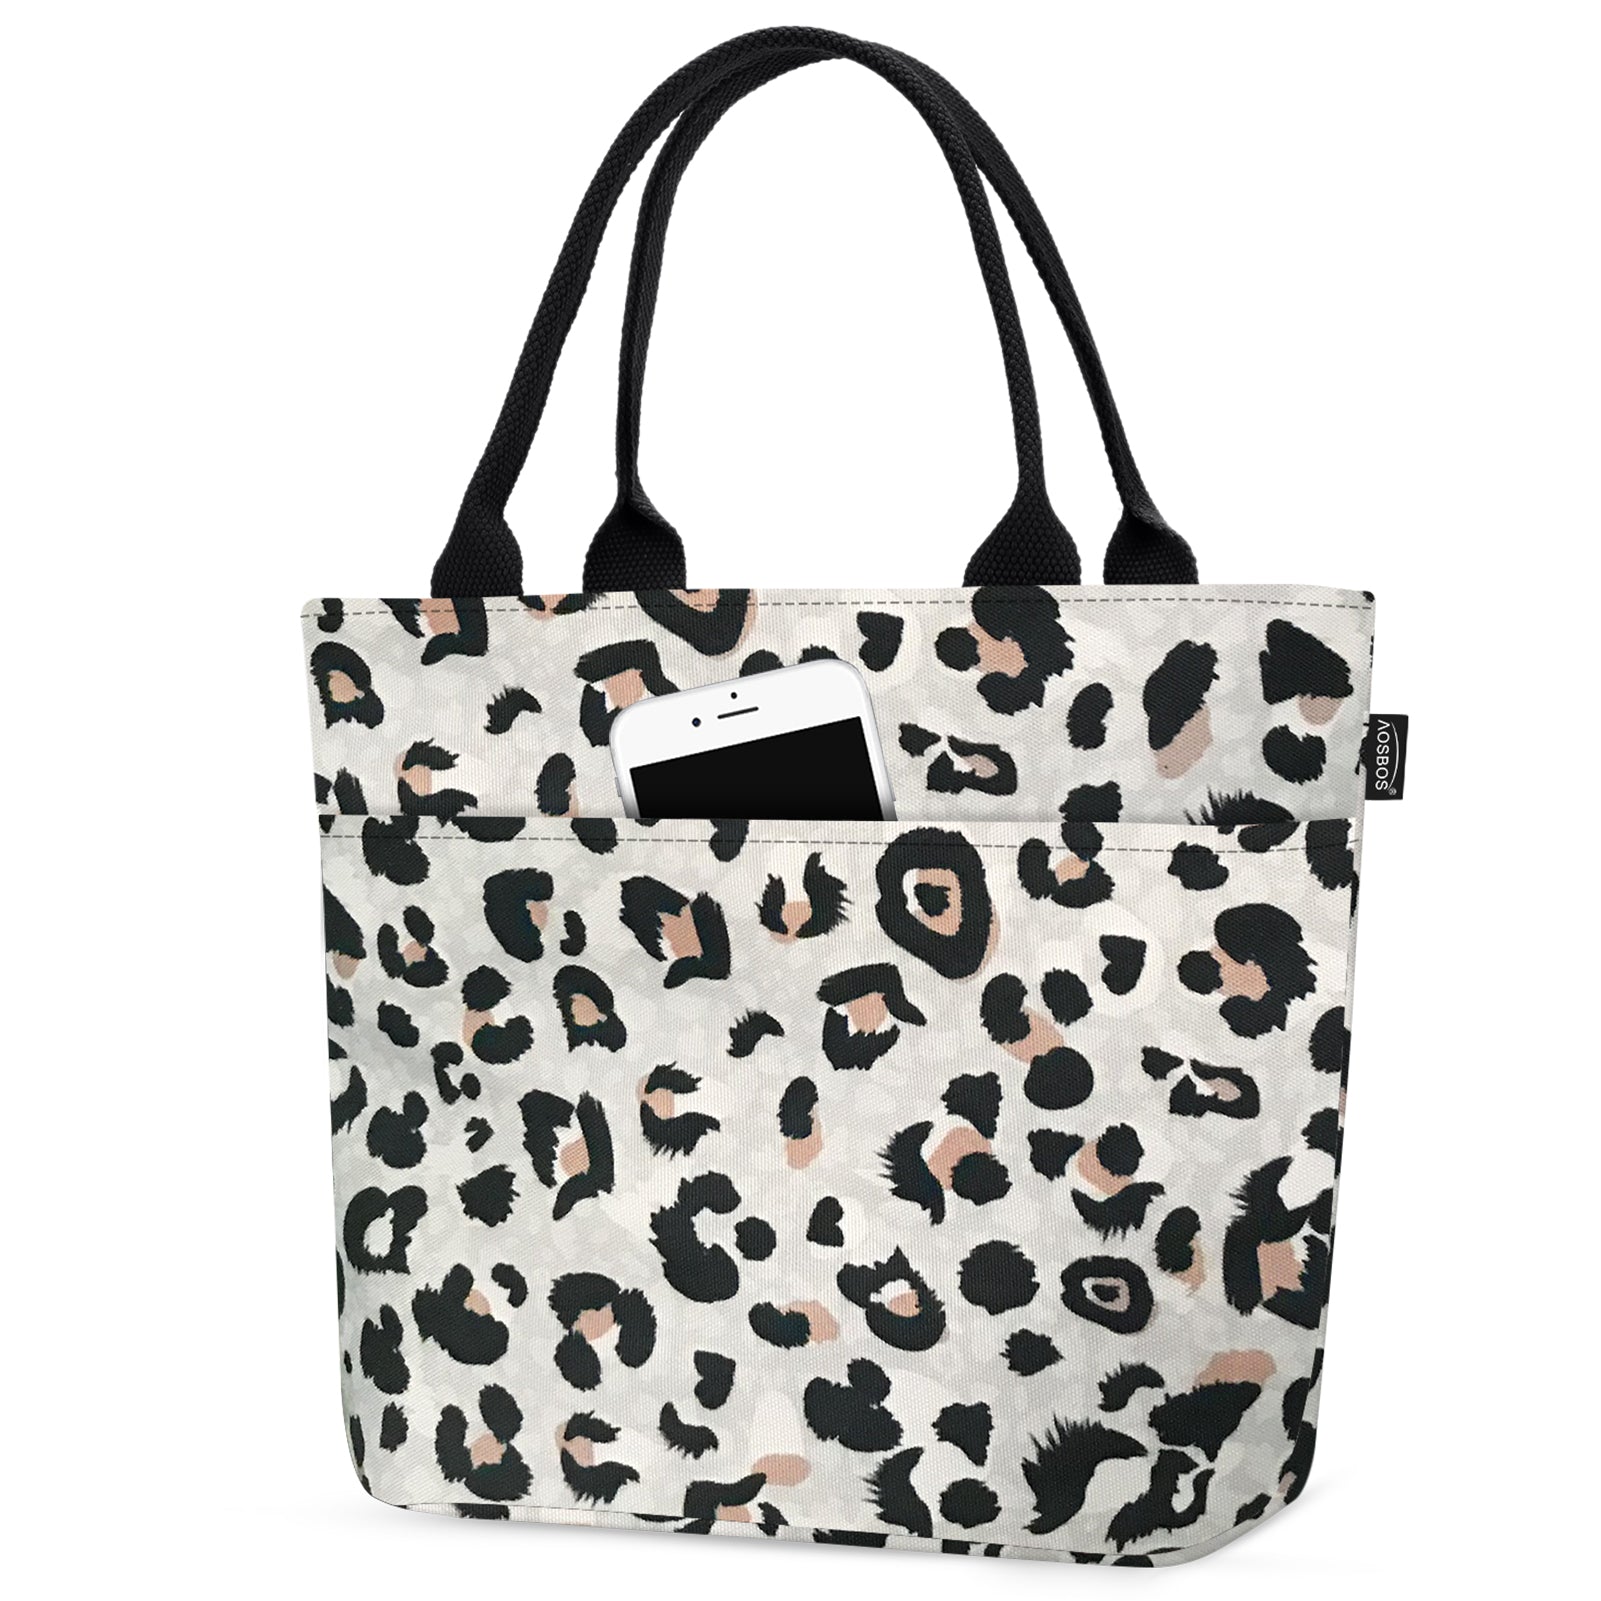 MIER Large Soft Cooler Insulated Lunch Bag Tote for Men Women, Leopard